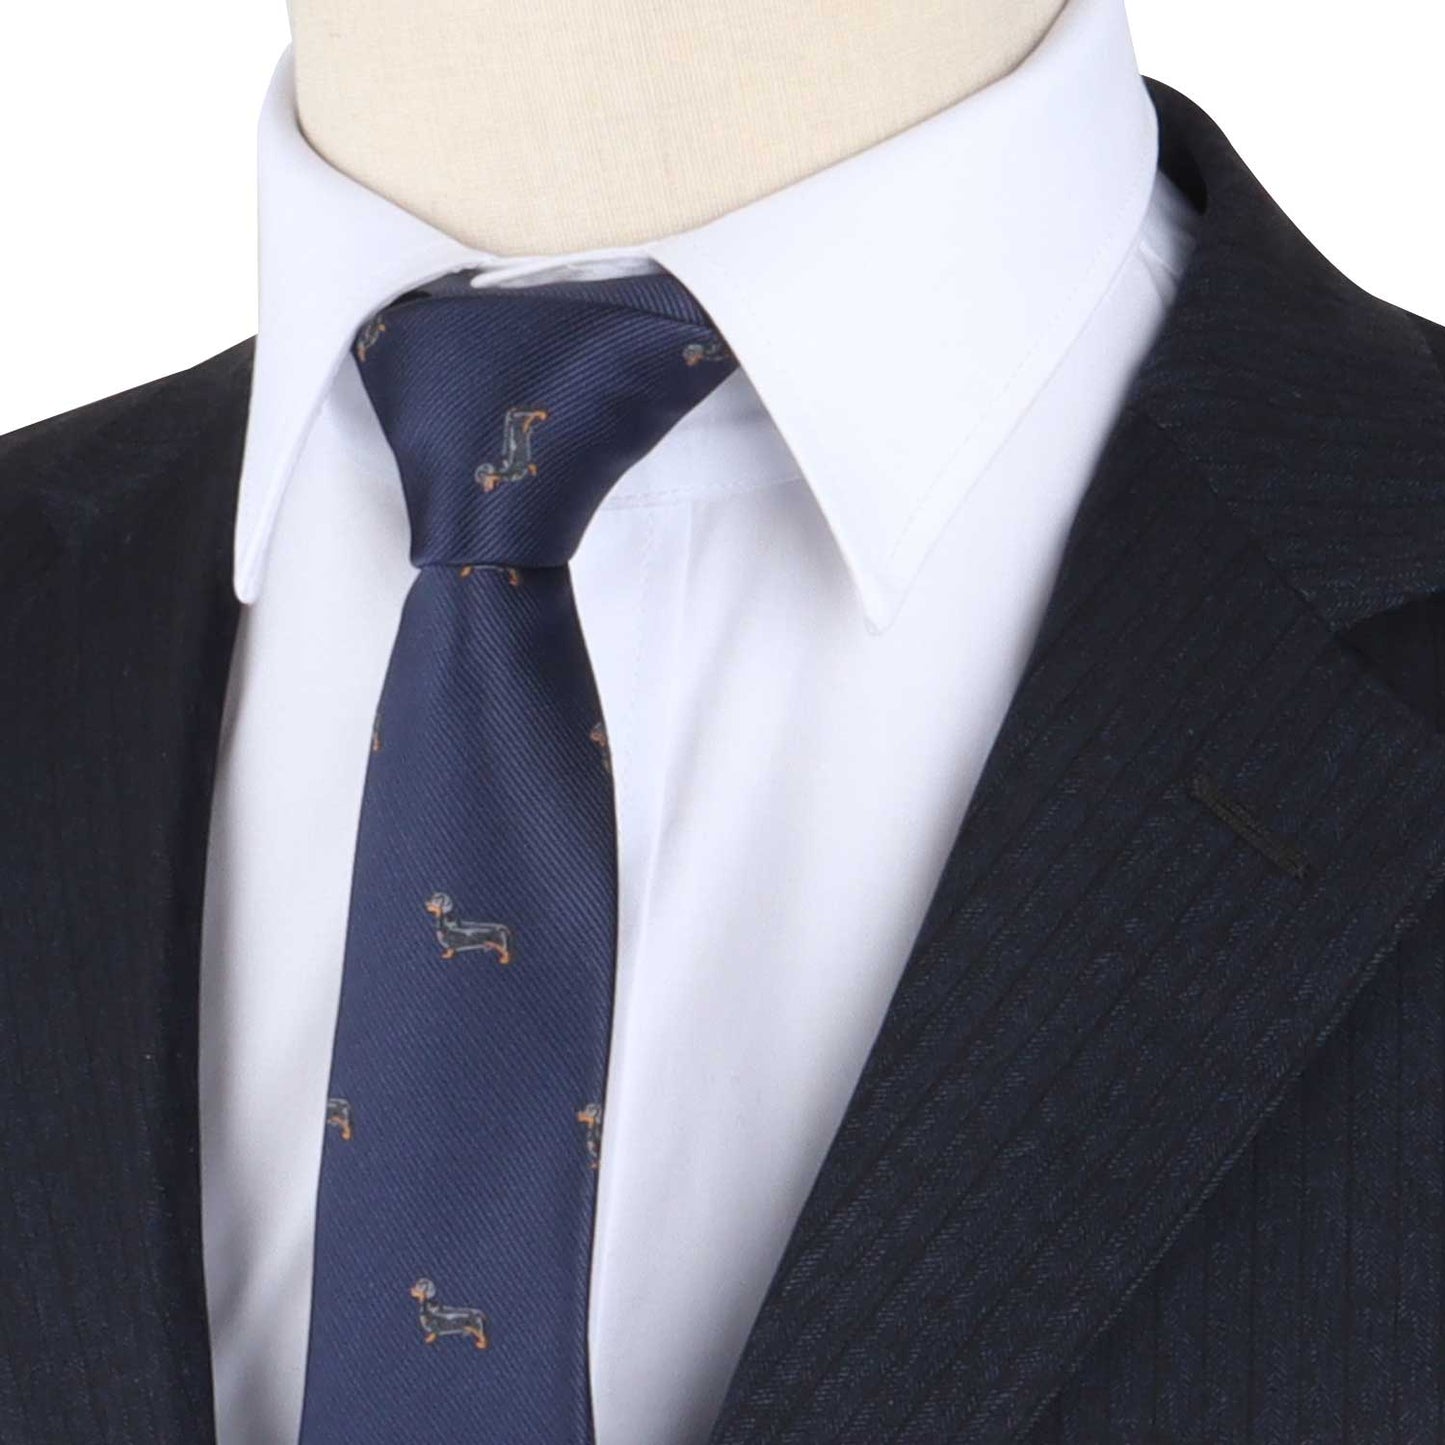 A mannequin dressed in a Sausage Dog Skinny Tie, exuding quirky charm with its playful look.